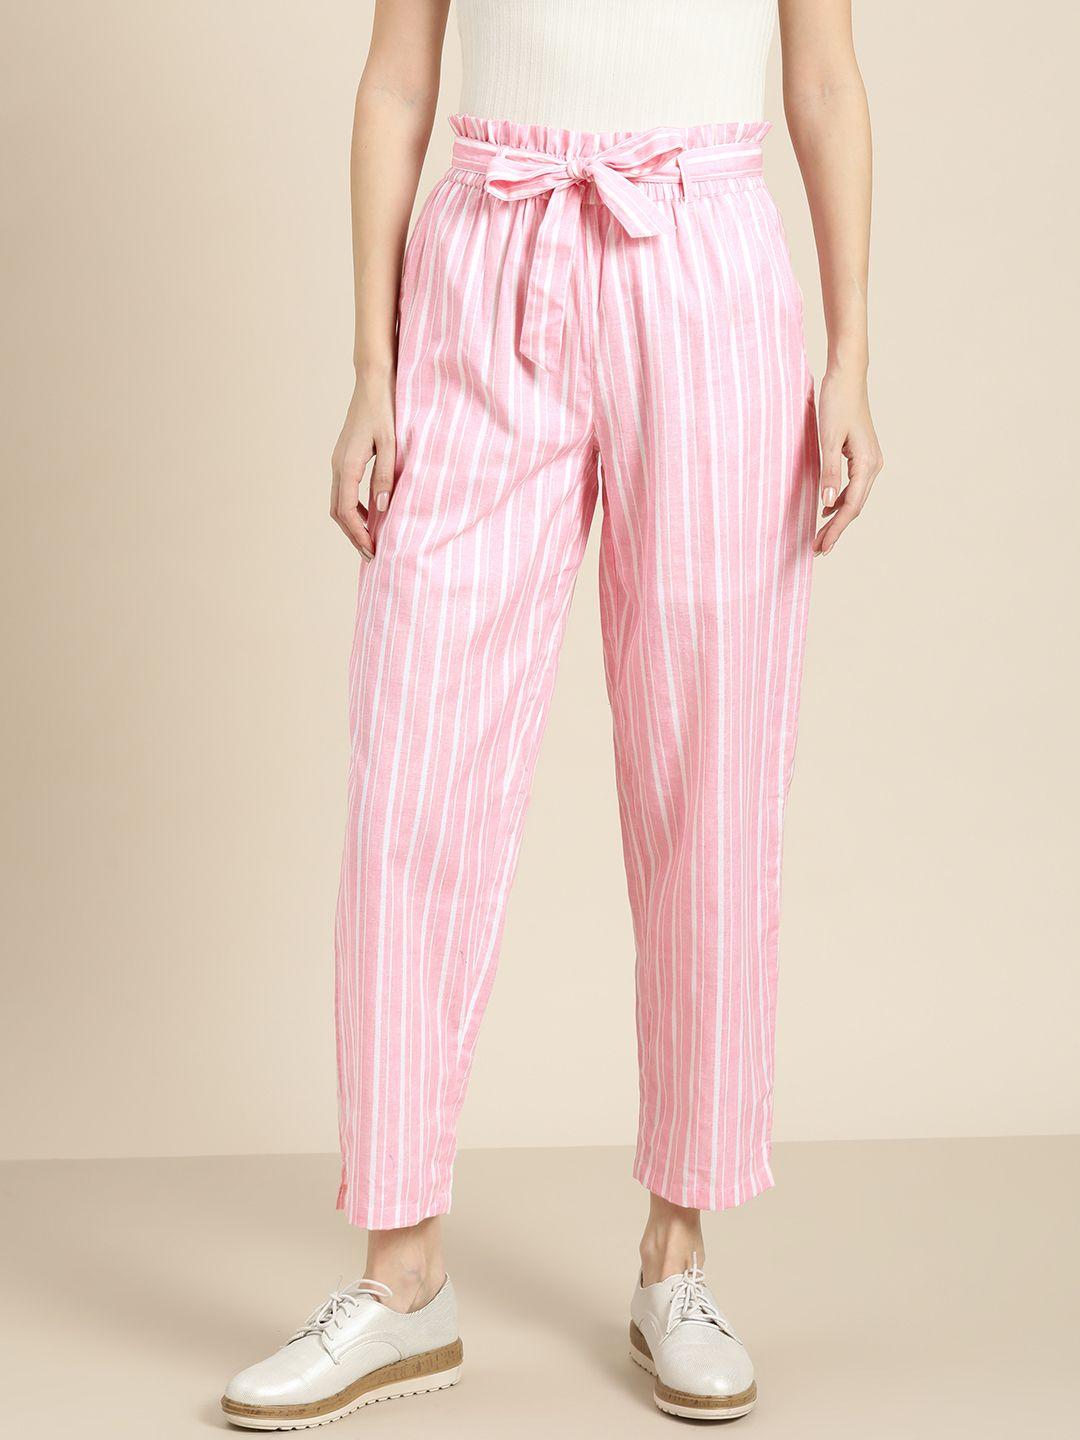 shae-by-sassafras-women-pink-&-white-regular-fit-striped-cropped-trousers